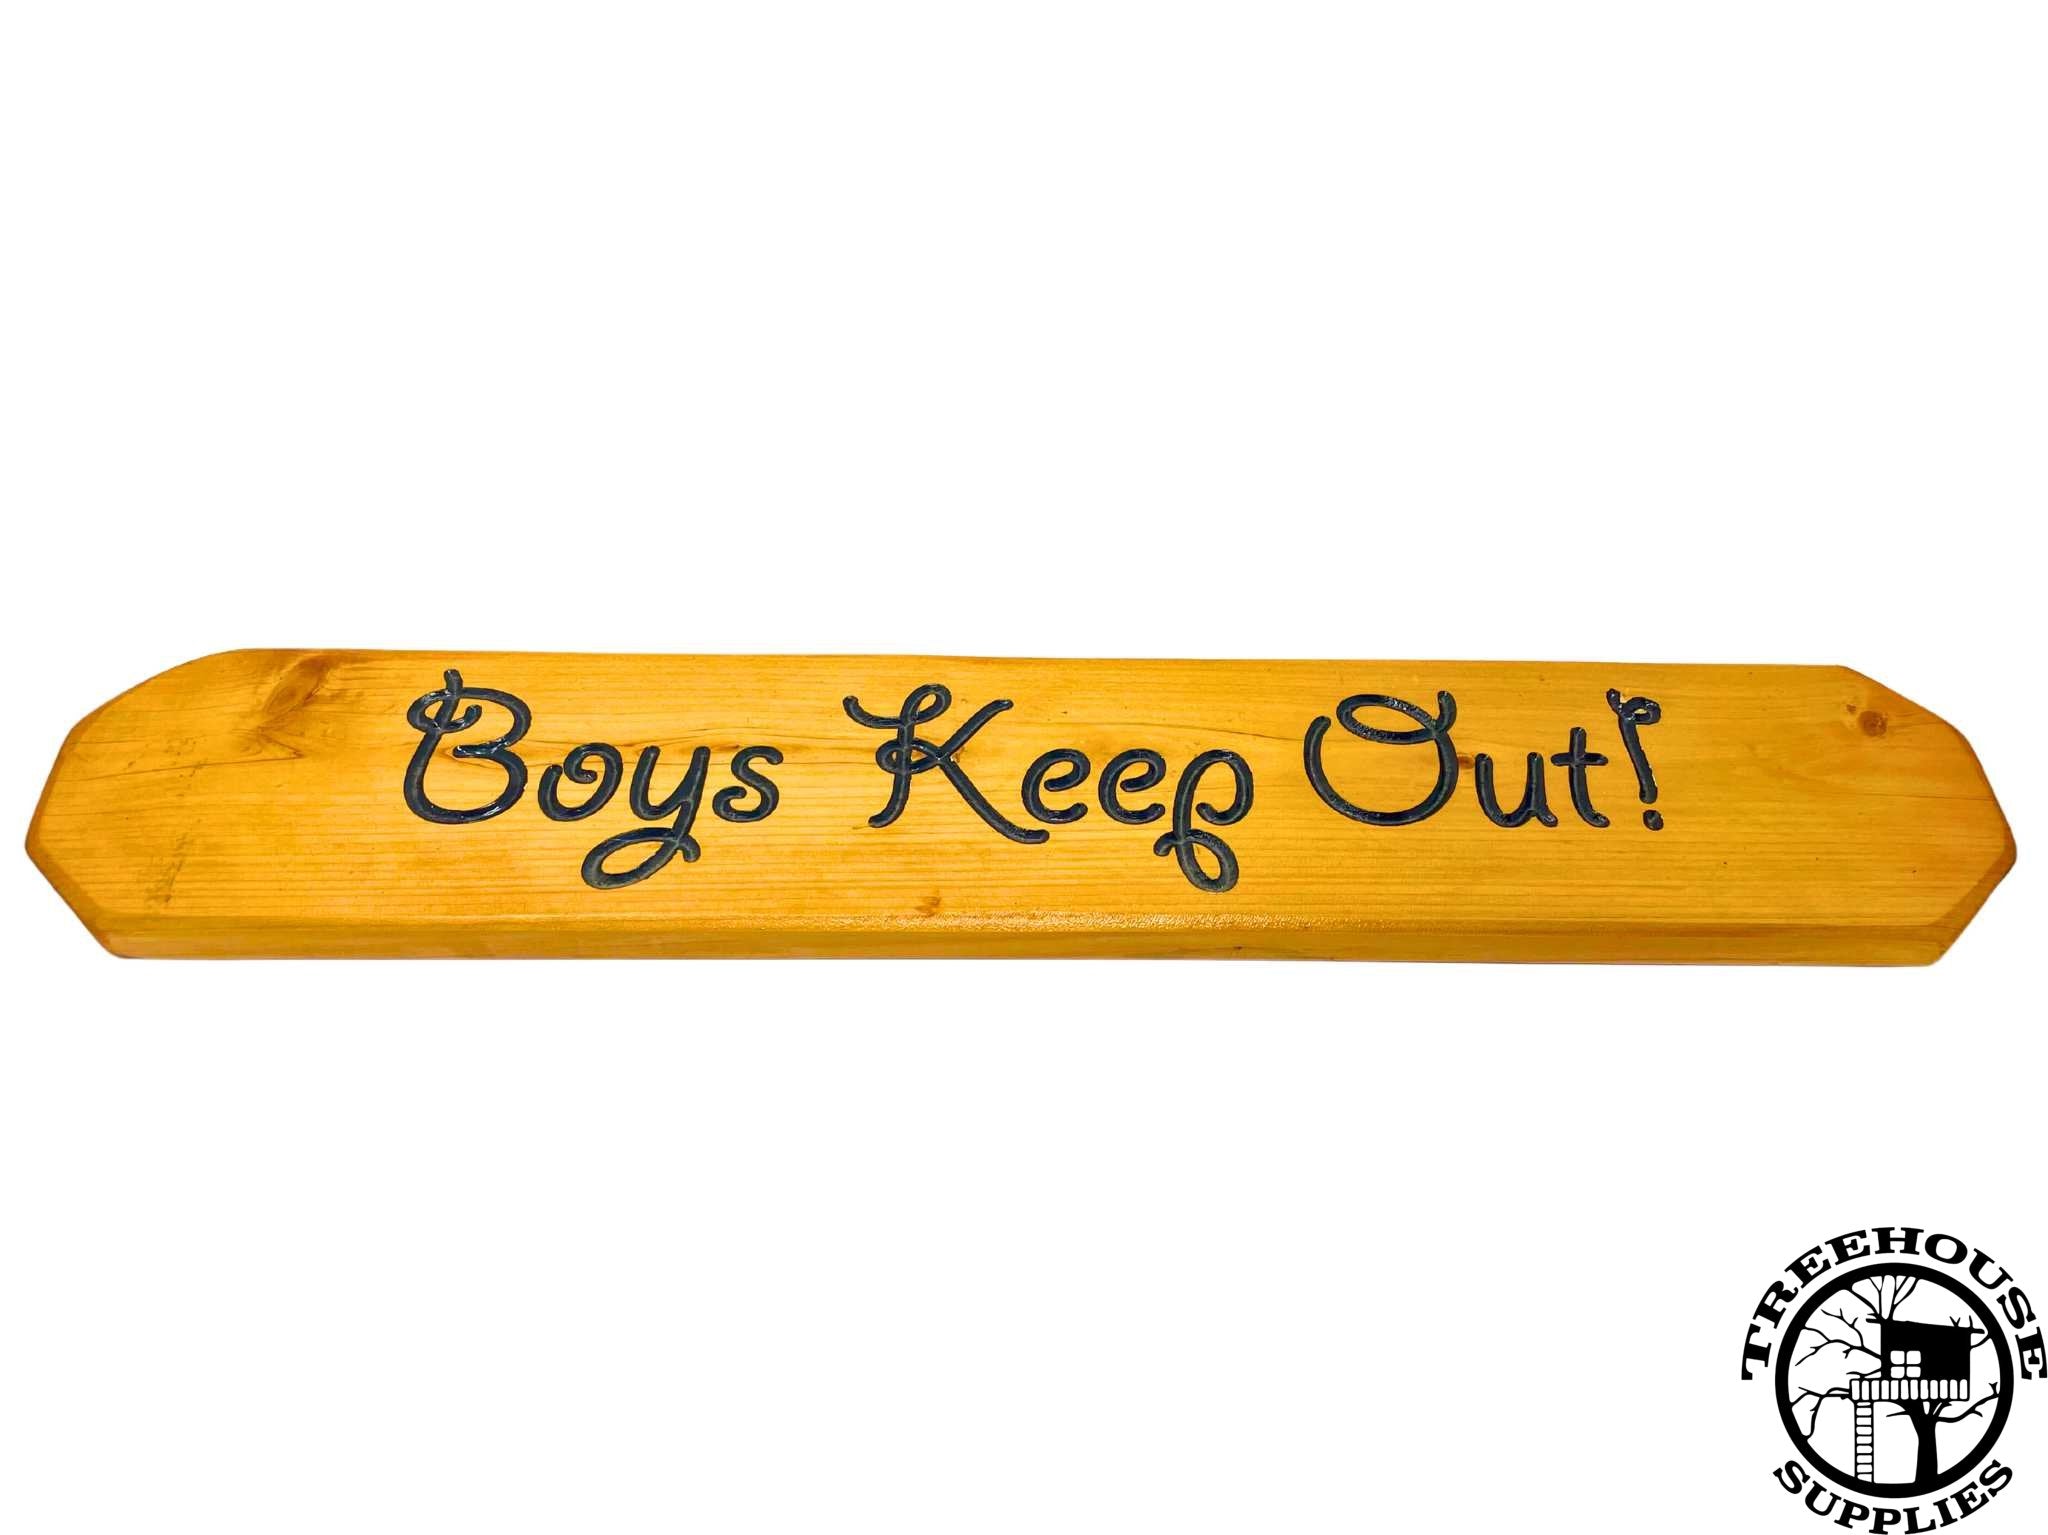 Two-foot-long wooden sign with lettering. Engraved or carved text states Boys Keep Out! White Background. Side view